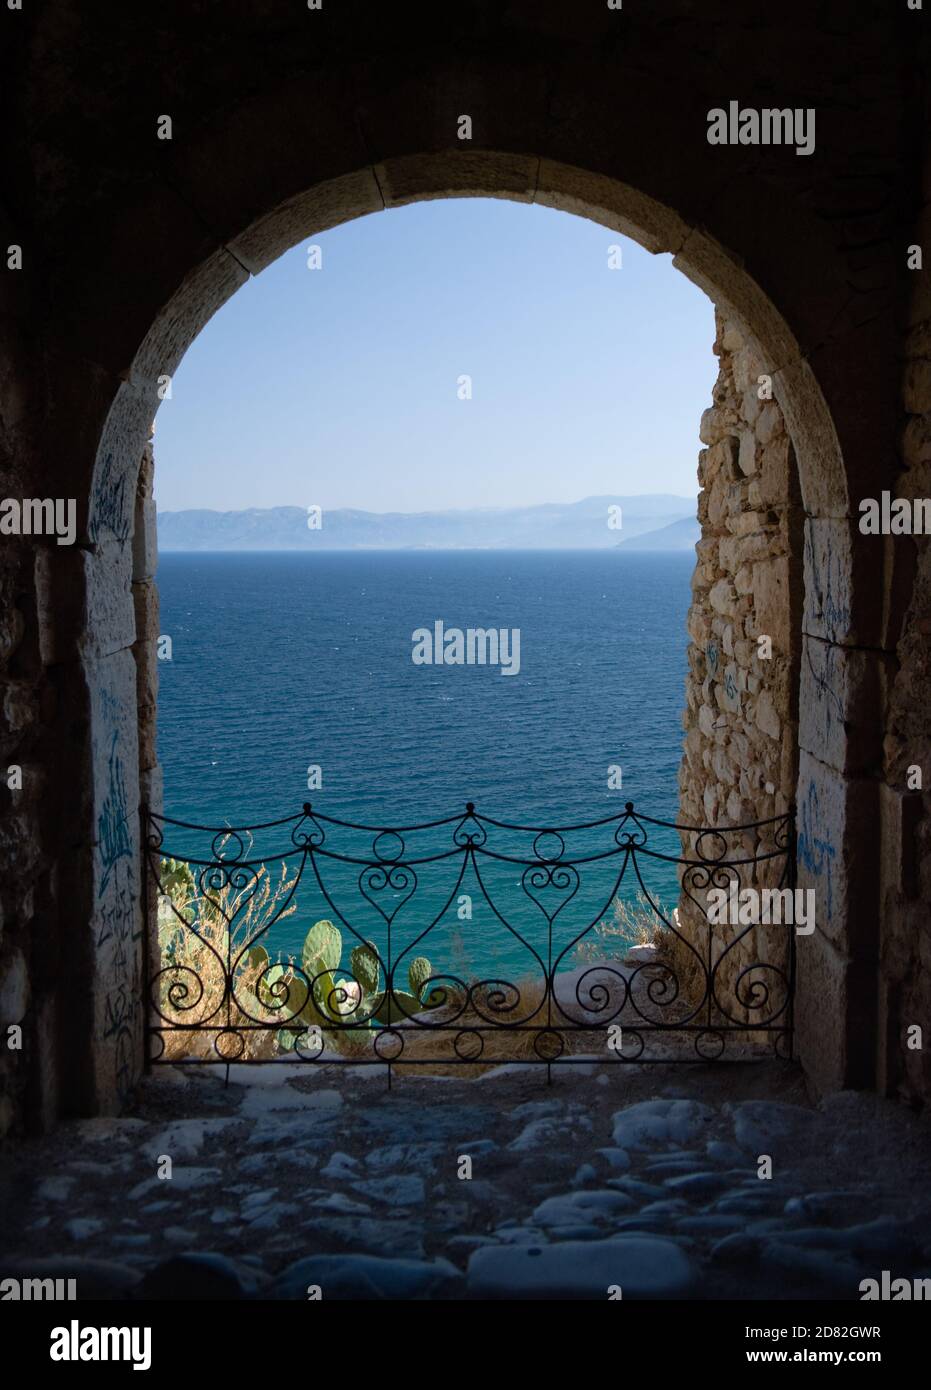 arched balcony on the sea of Nafplio from the Palamidi fortress, Greece Stock Photo